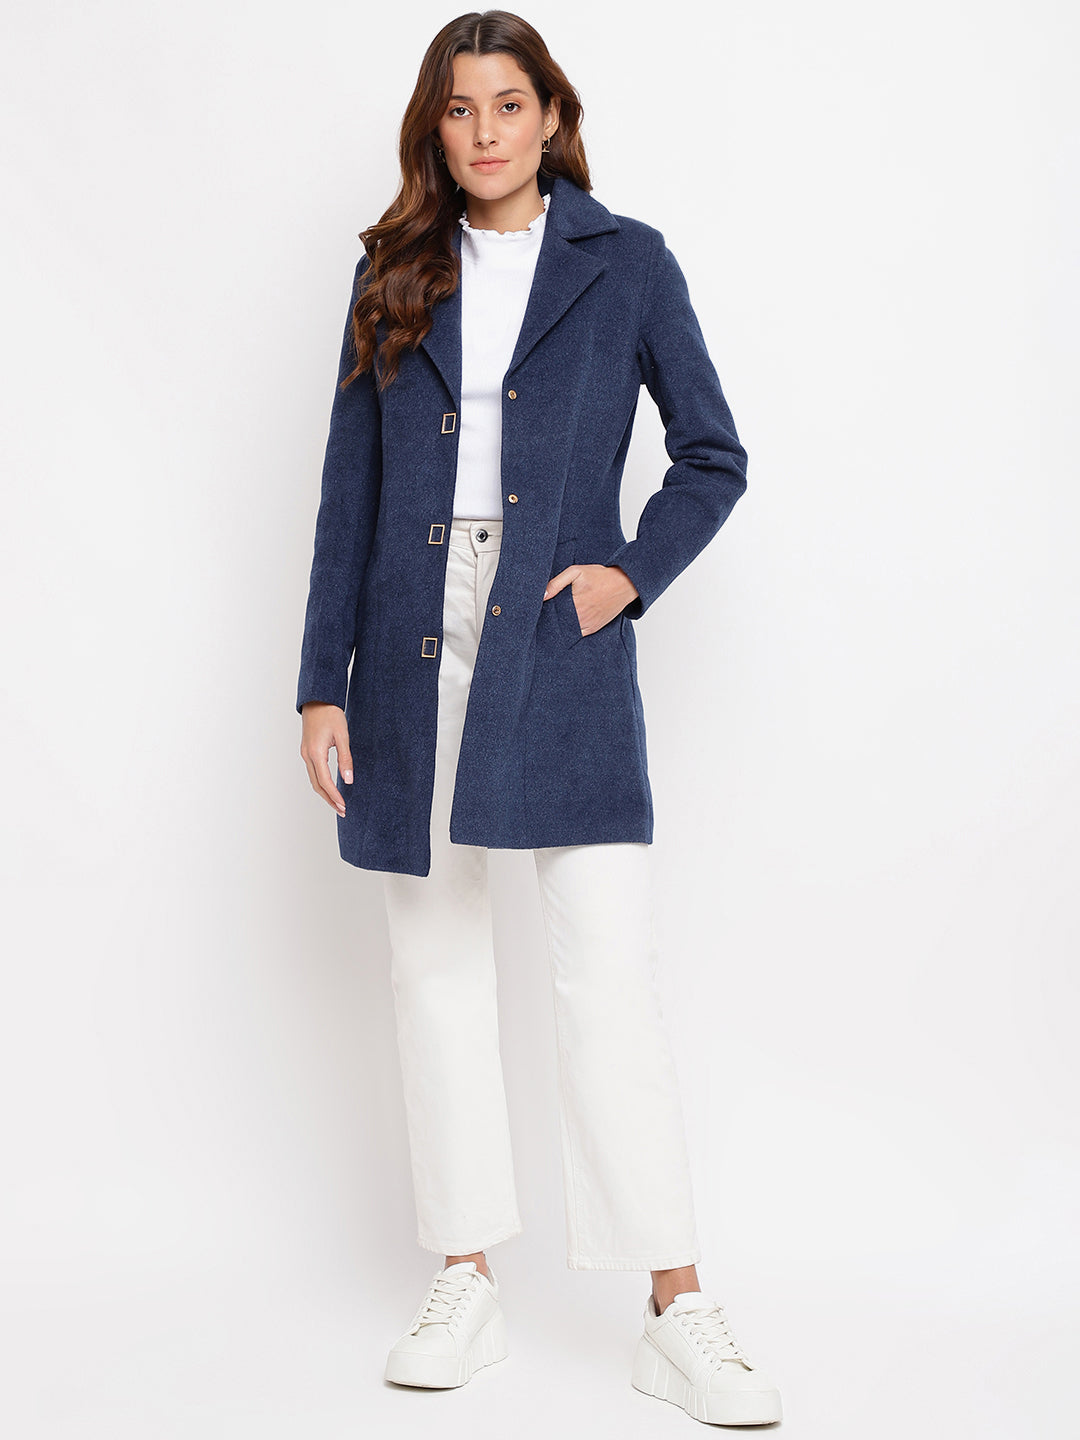 Blue Solid Full Sleeve Casual Jacket